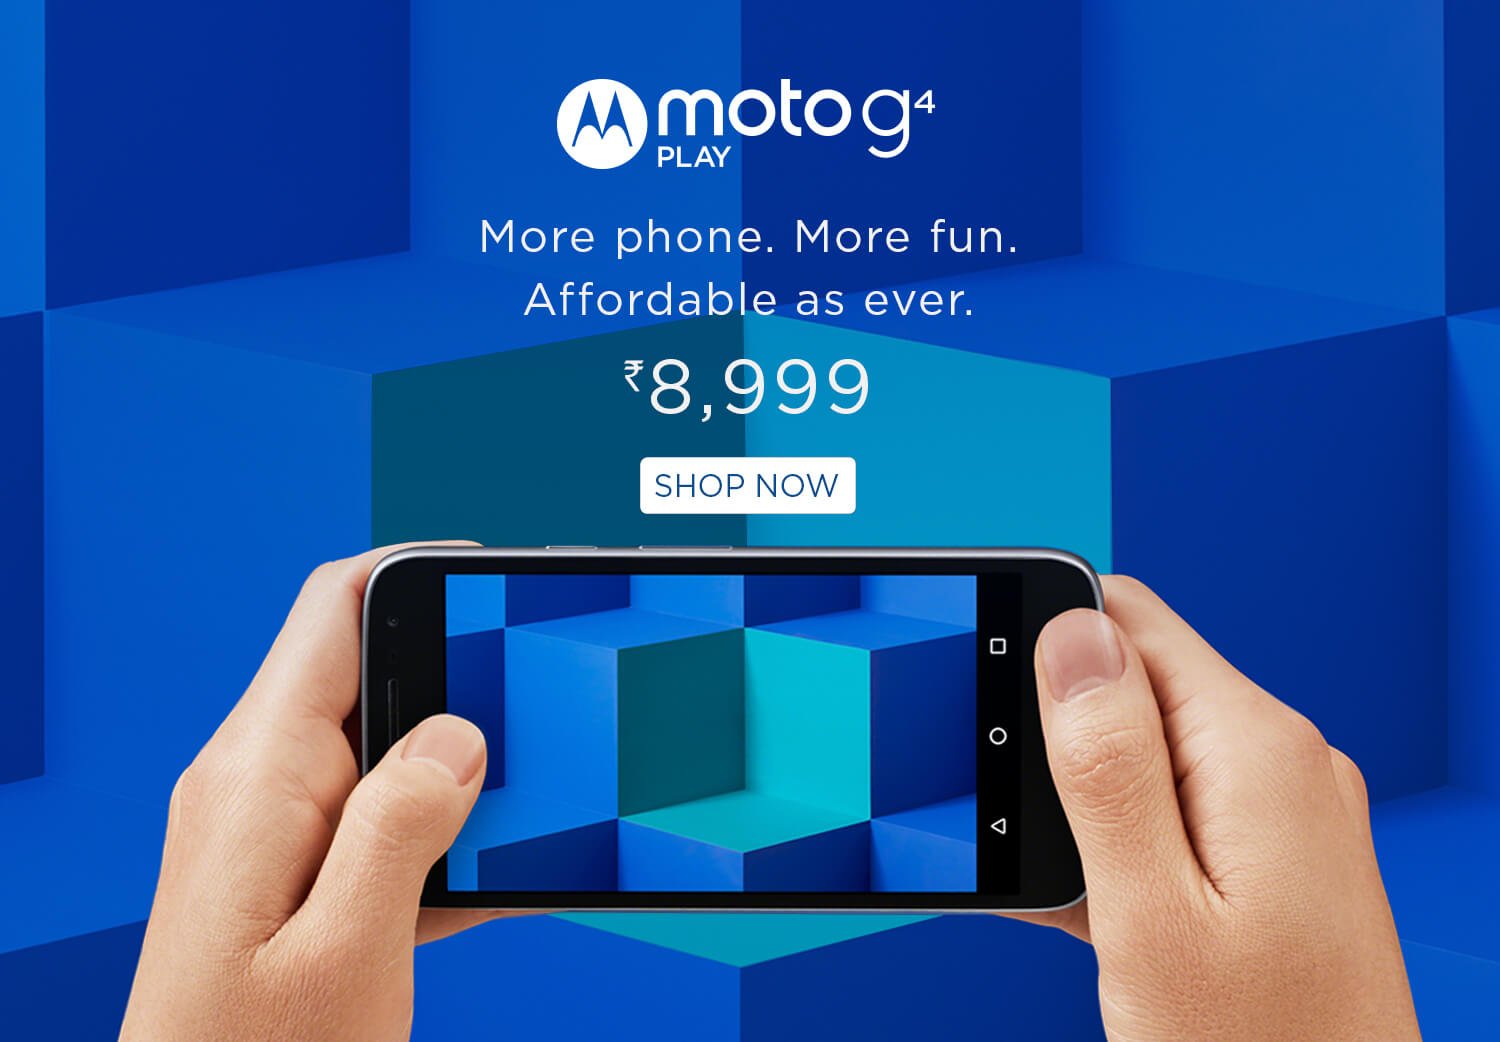 Motorola launched Moto G Play, 4th Gen in India for Rs.8,999